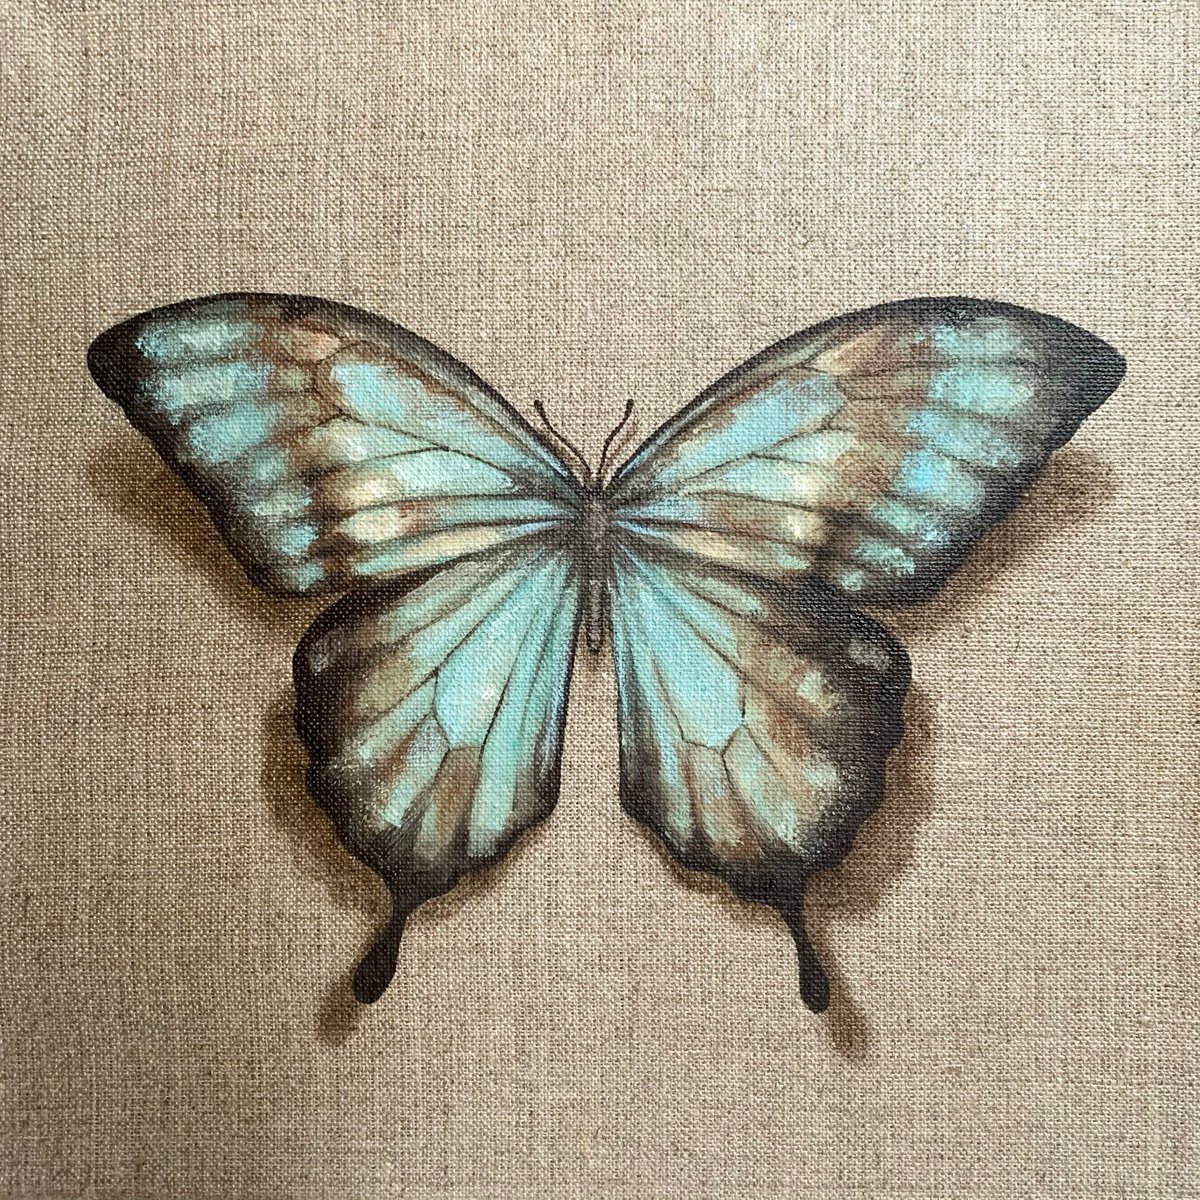 -Impermanent life-? #17 Turquoise butterfly by Alina Marsovna